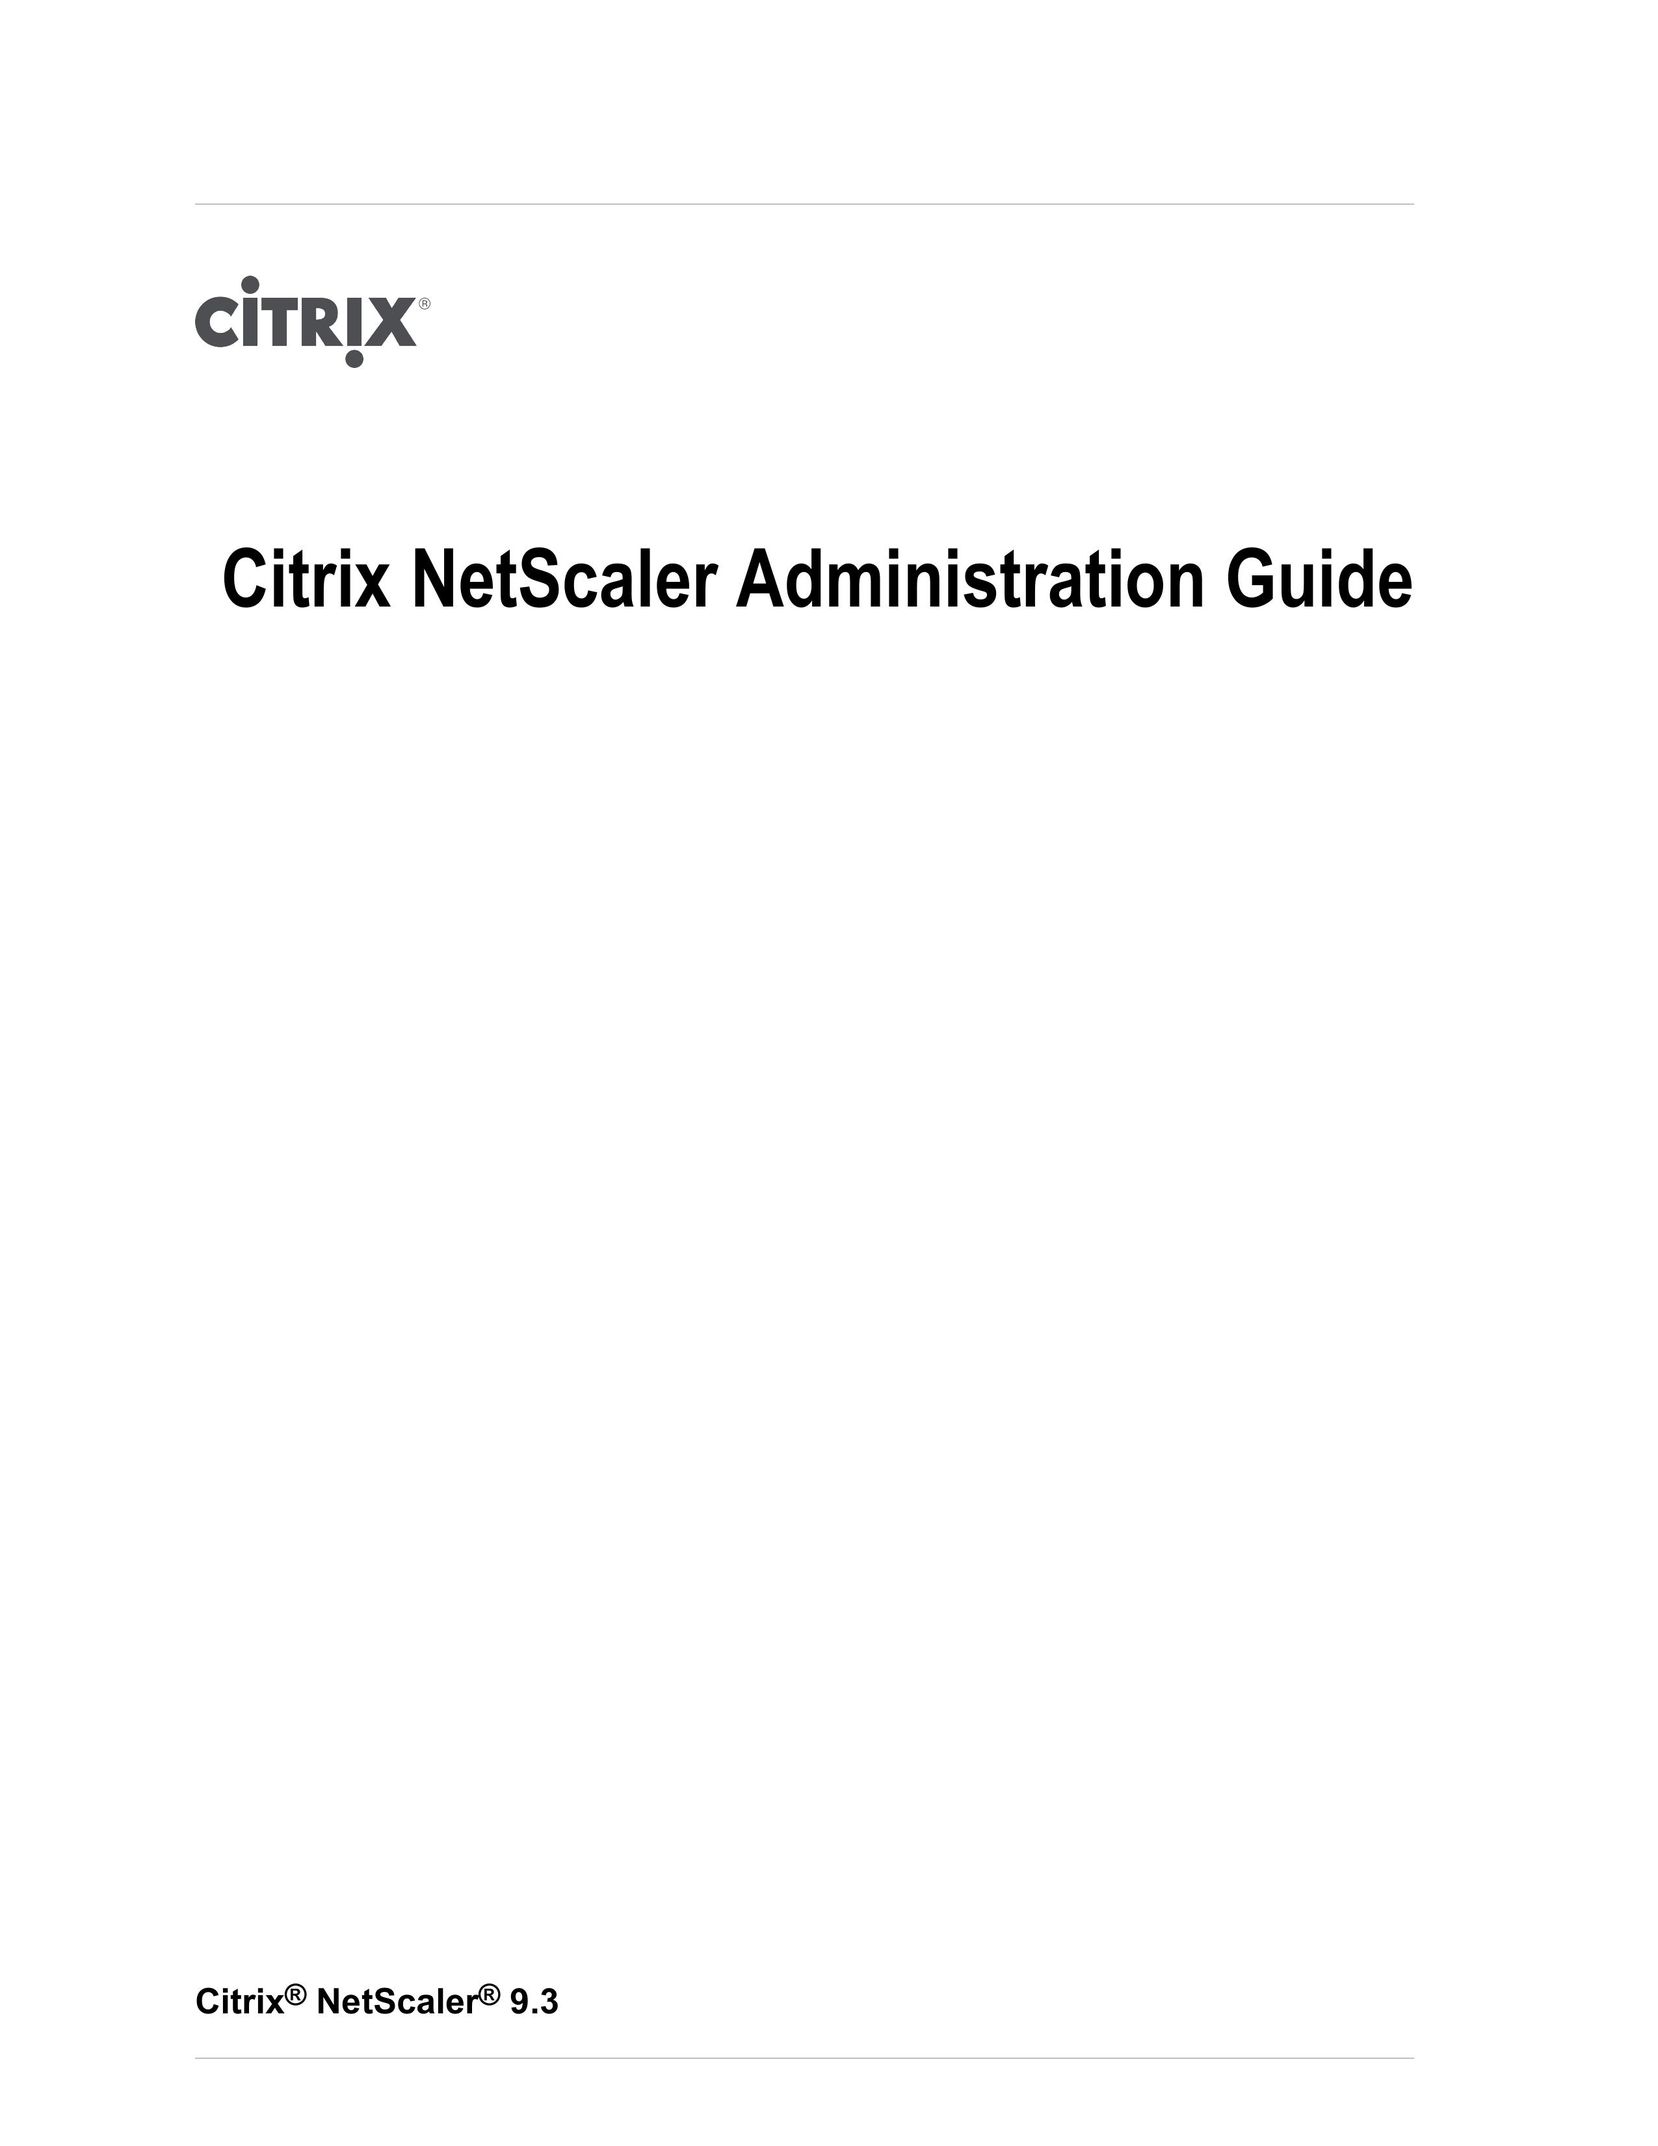 Citrix Systems CITRIX NETSCALER 9.3 Network Router User Manual